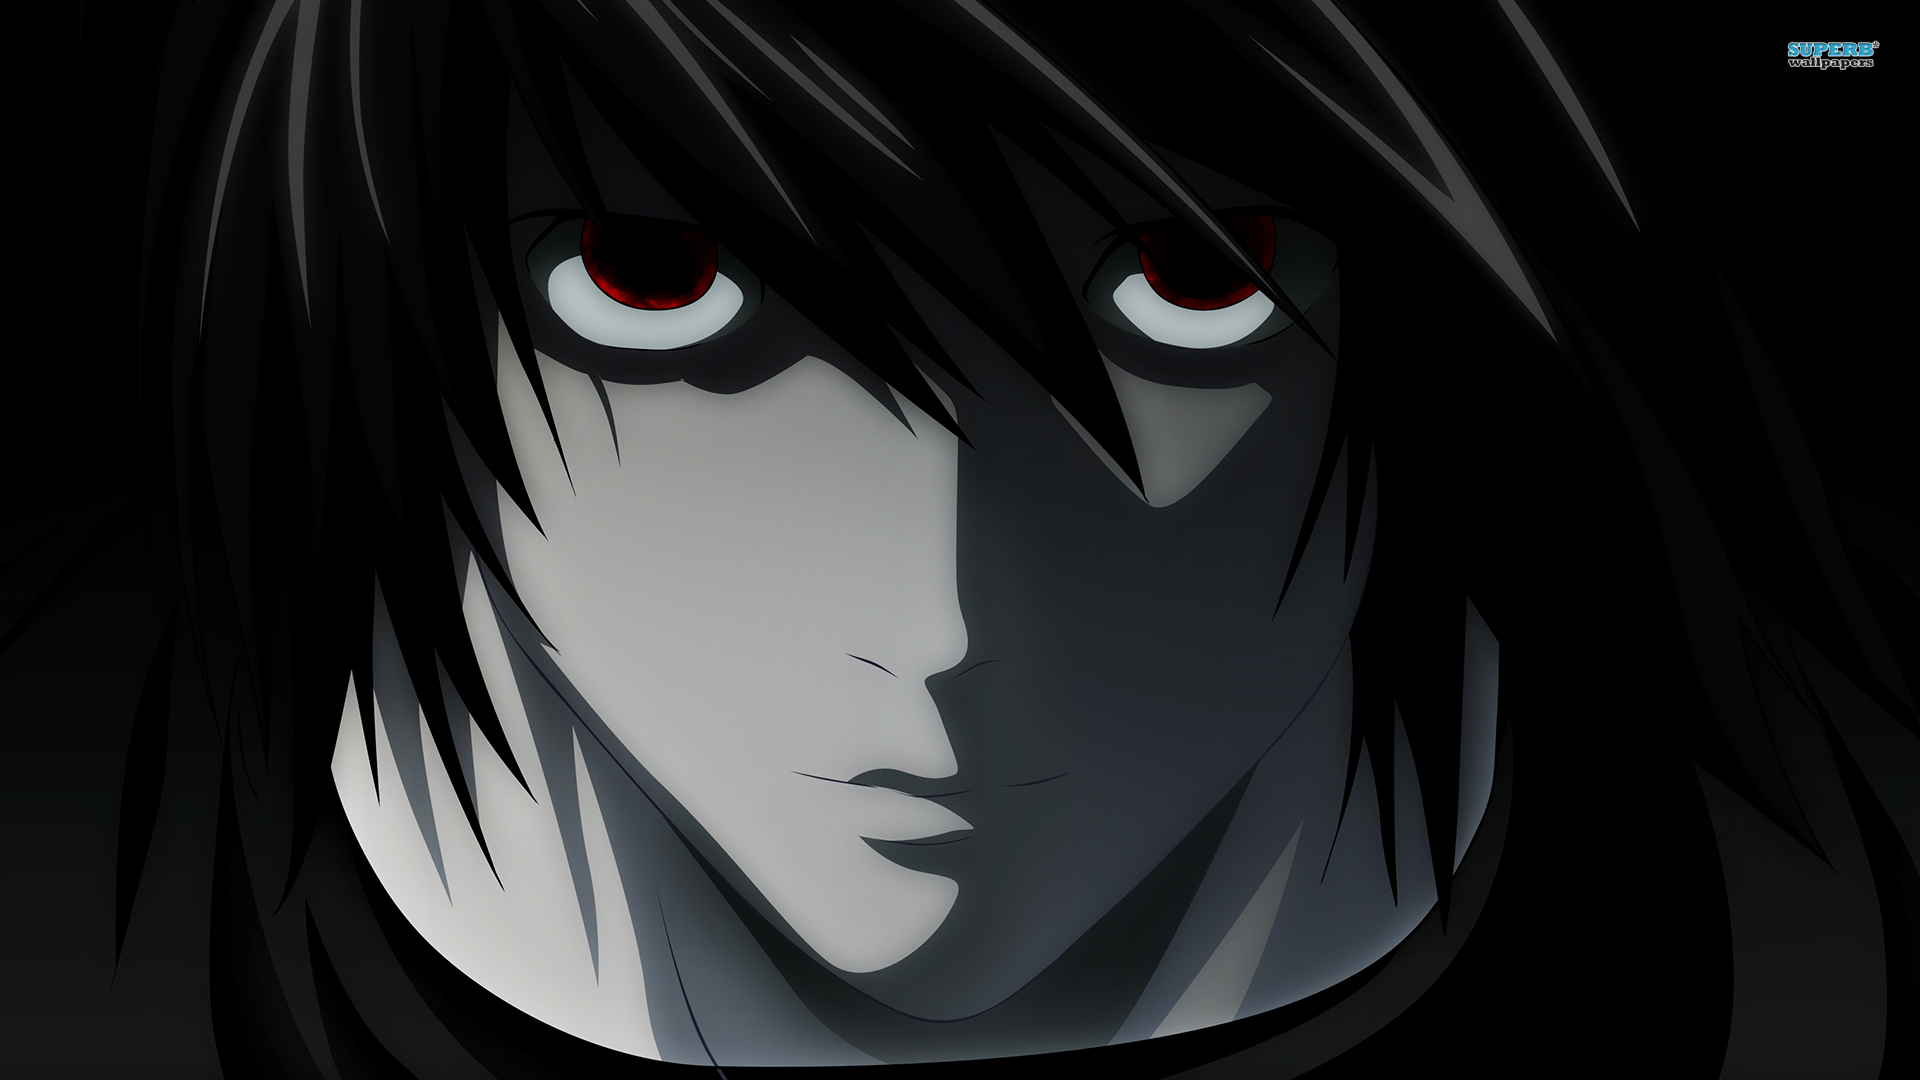 Death Note 1 Wallpaper - MixHD wallpapers